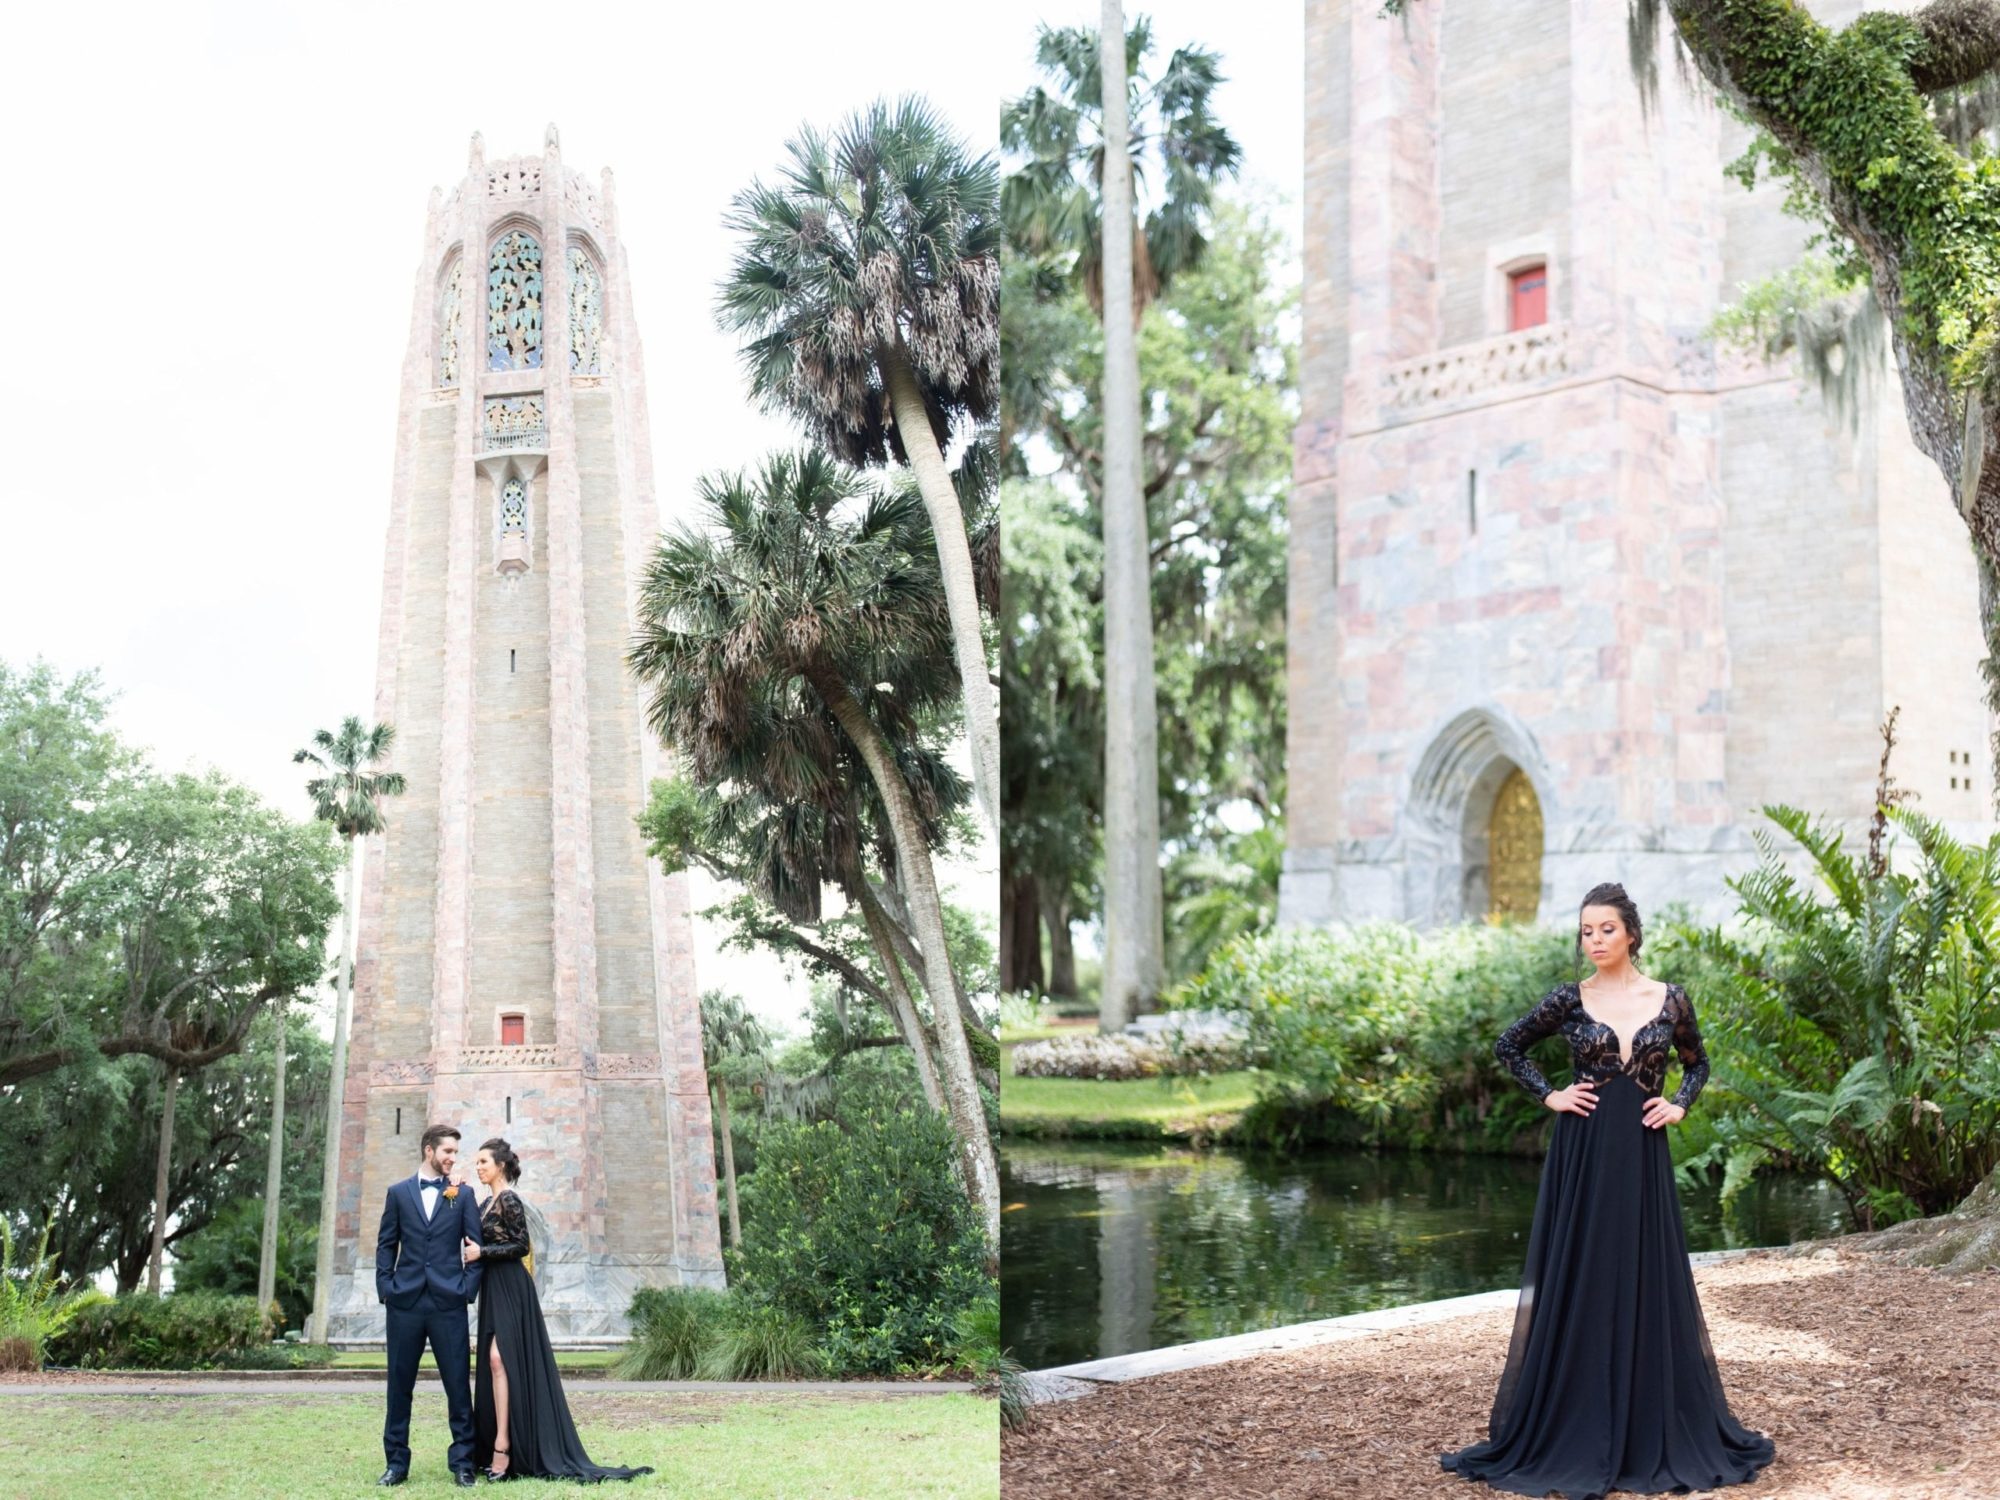 Bok tower gardens wedding elegant couple in black gown and navy tuxedo by the singing tower